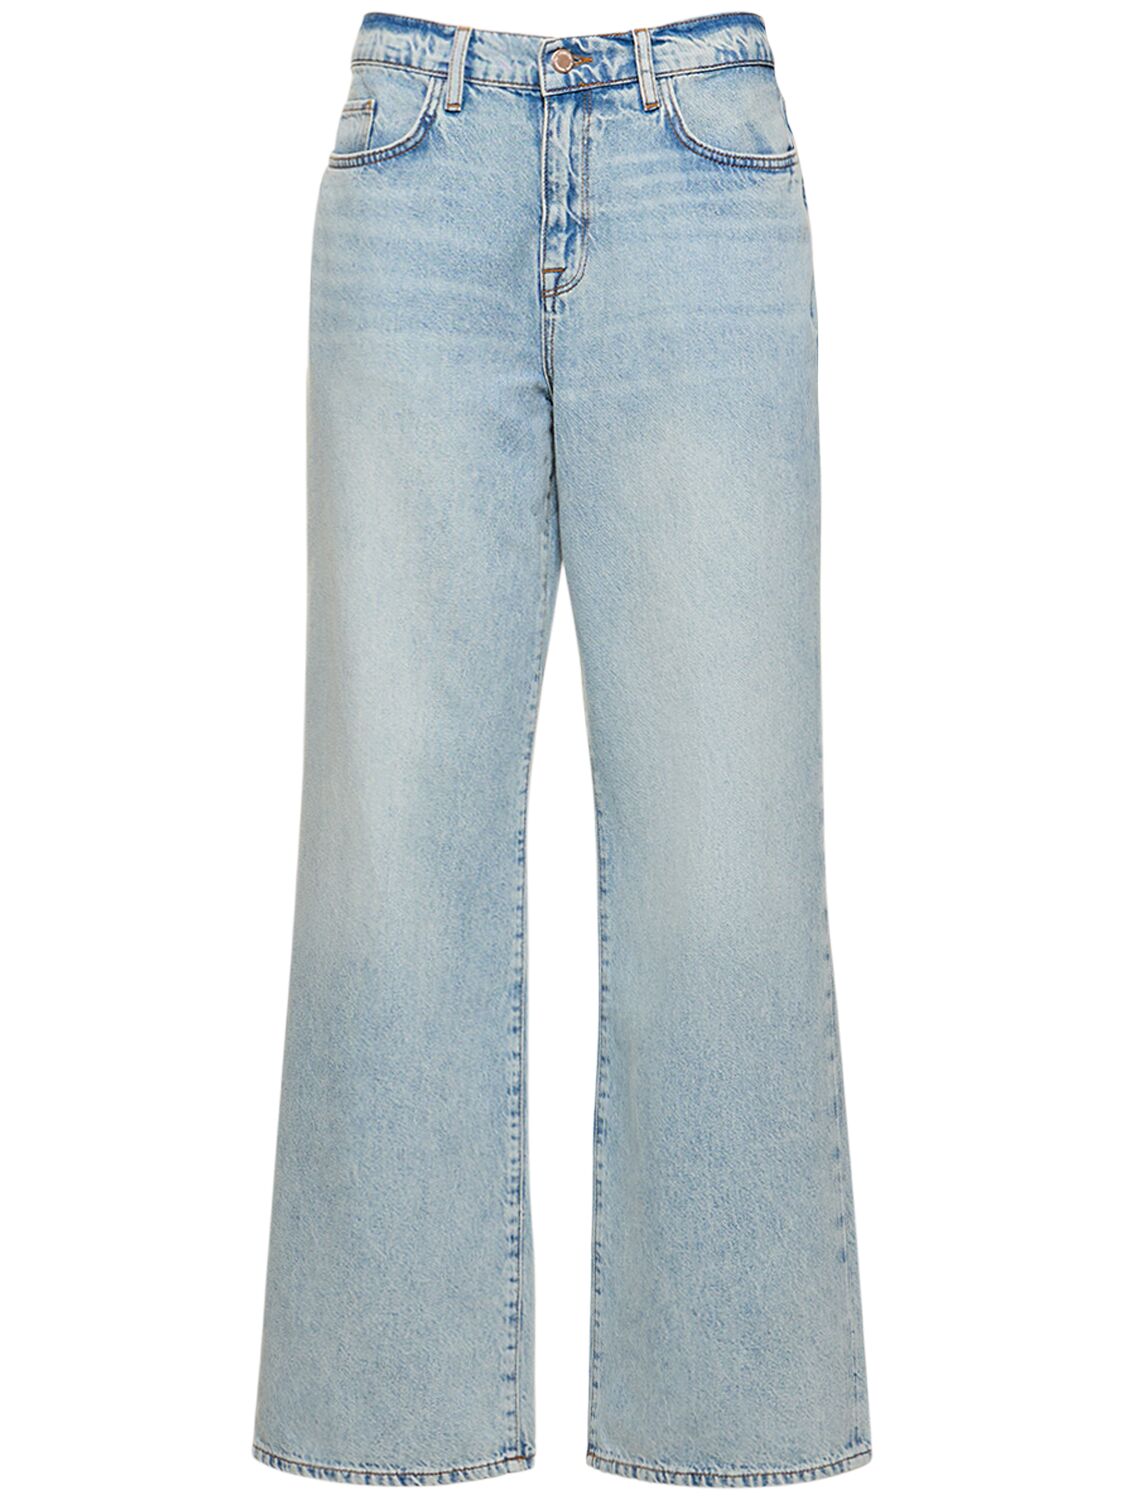 Ms. Miley Mid-rise Baggy Cotton Jeans